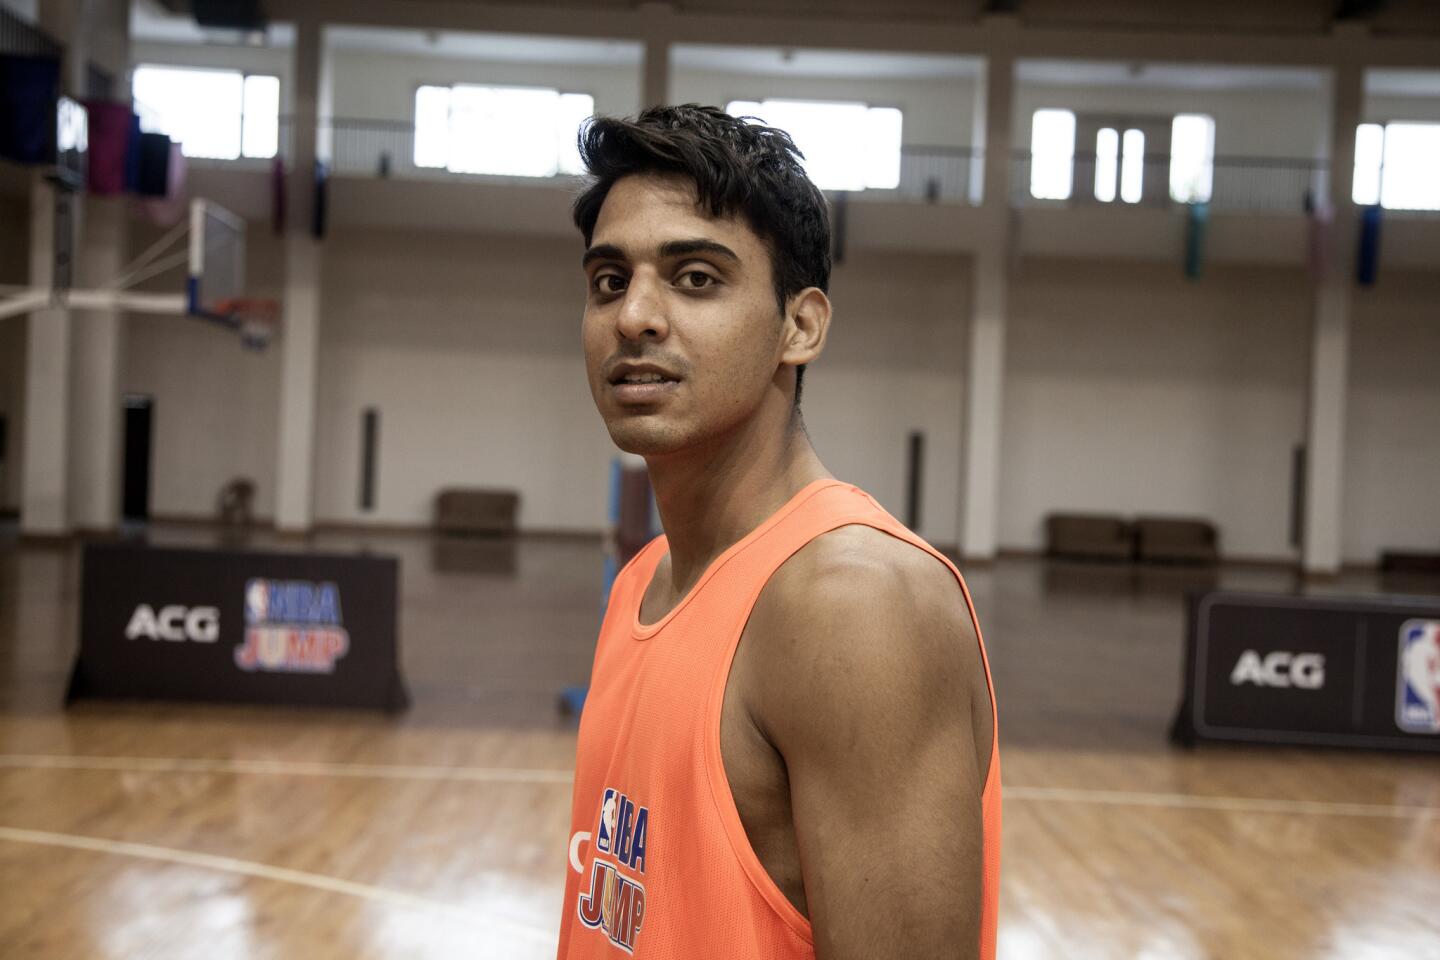 Loveneet Singh Atwal was one of 32 promising young Indian players invited to a tryout for the NBA's Development League at a sports complex in Greater Noida, near New Delhi.